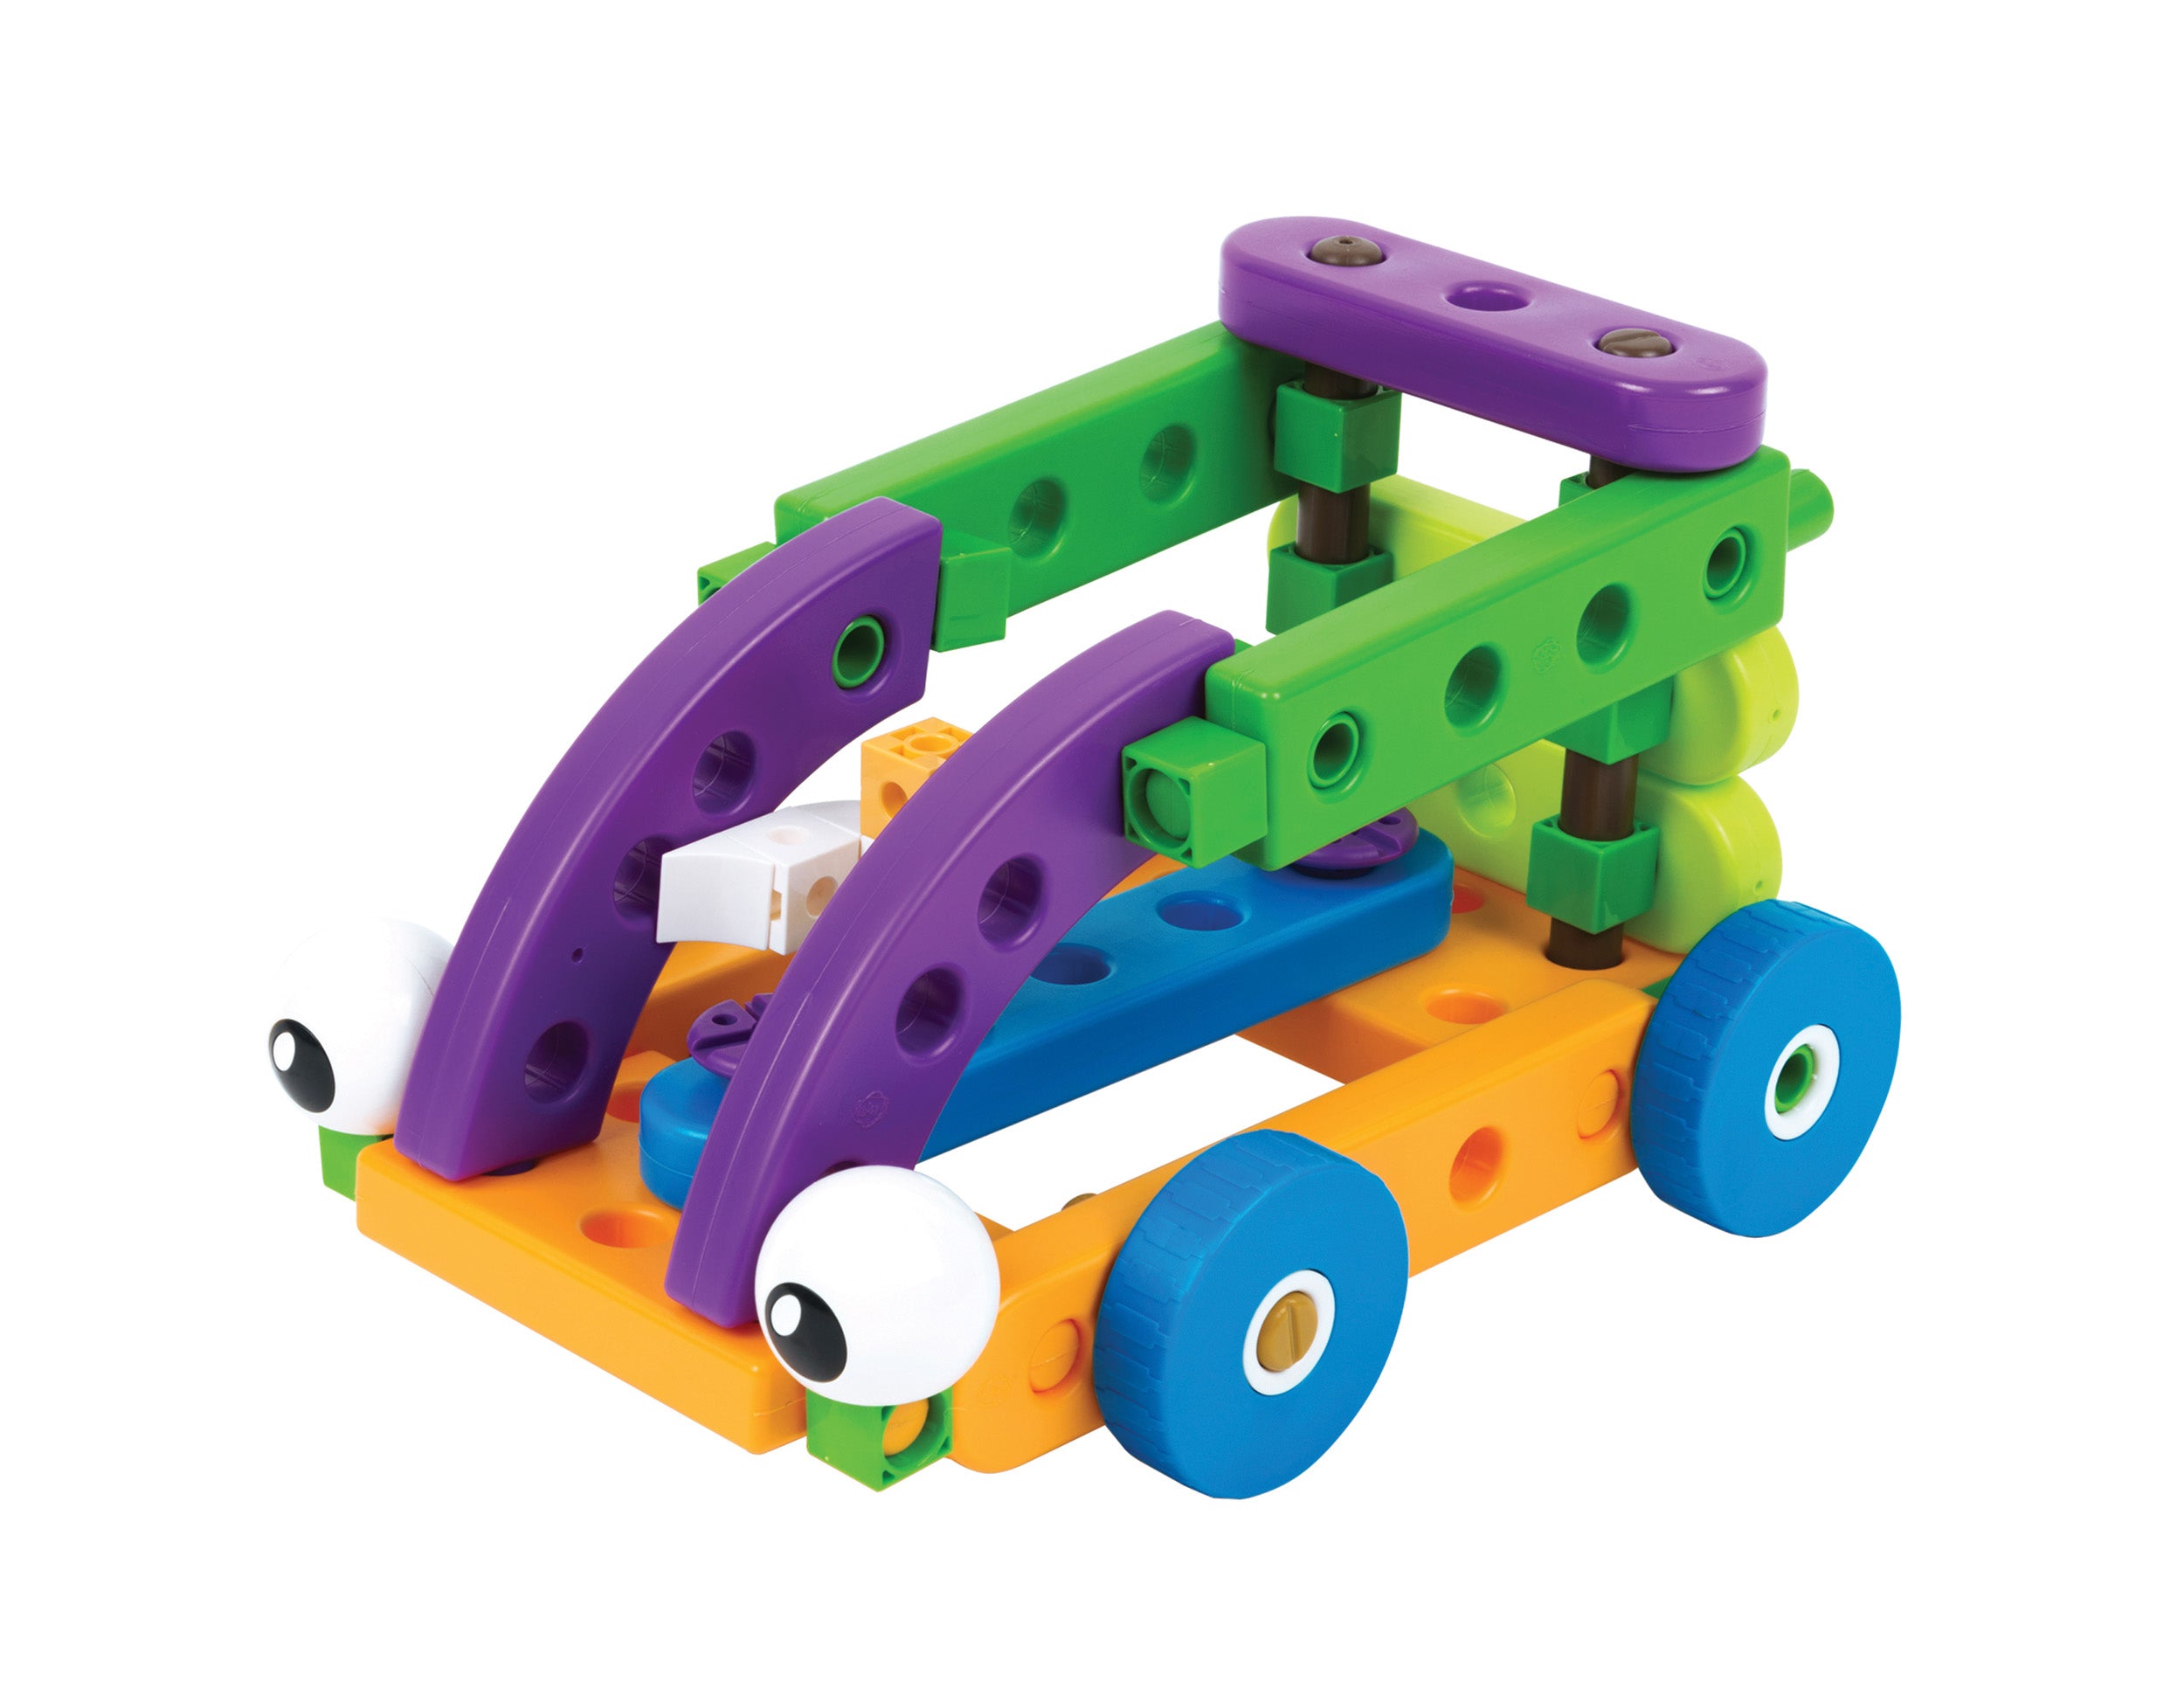 Kids First - Automobile Engineer    